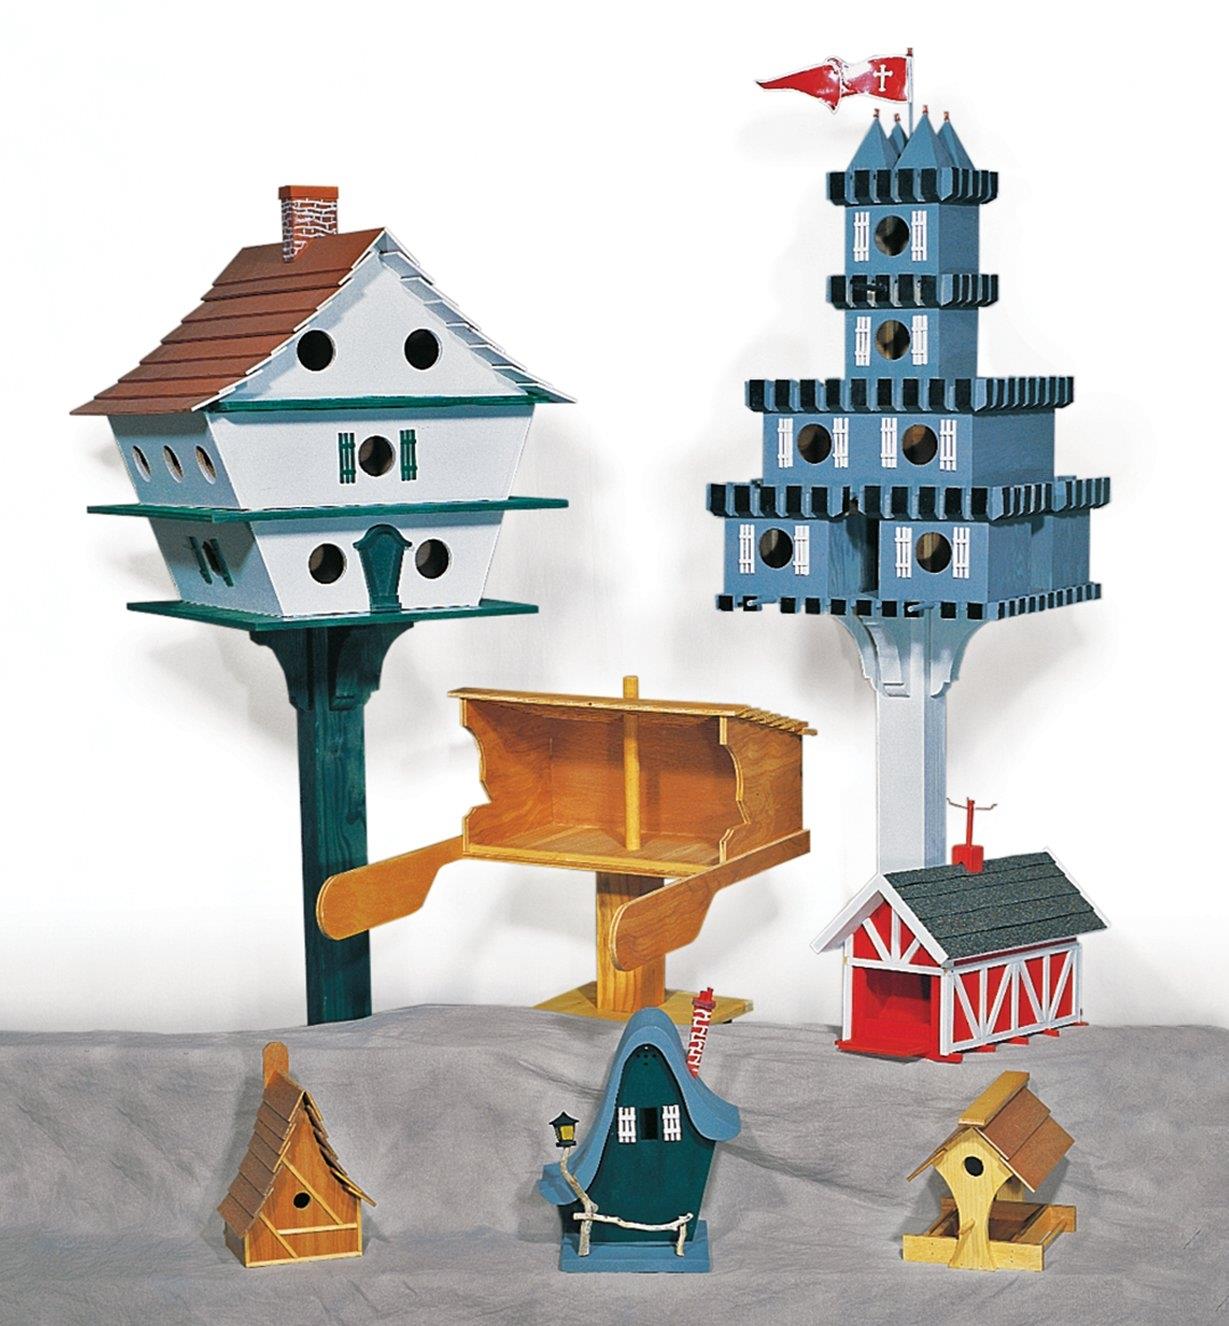 Examples of completed birdhouses